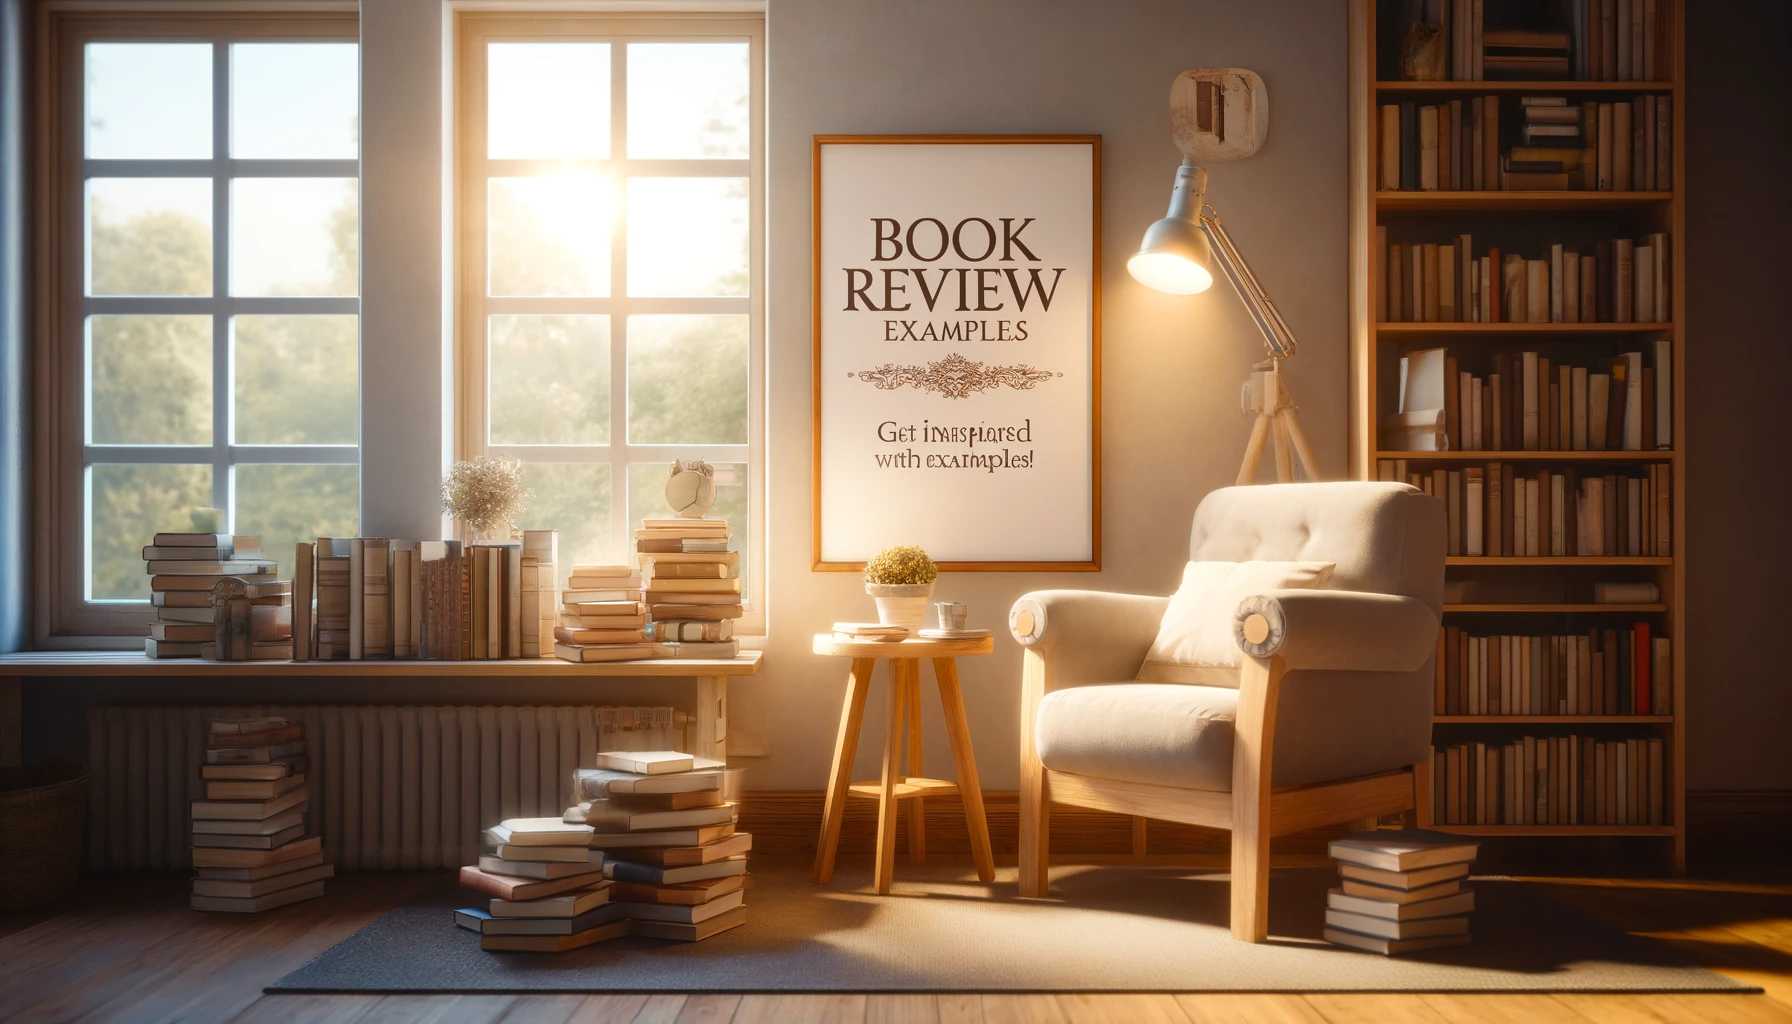 BOOK REVIEW EXAMPLES: GET INSPIRED WITH EXAMPLES!